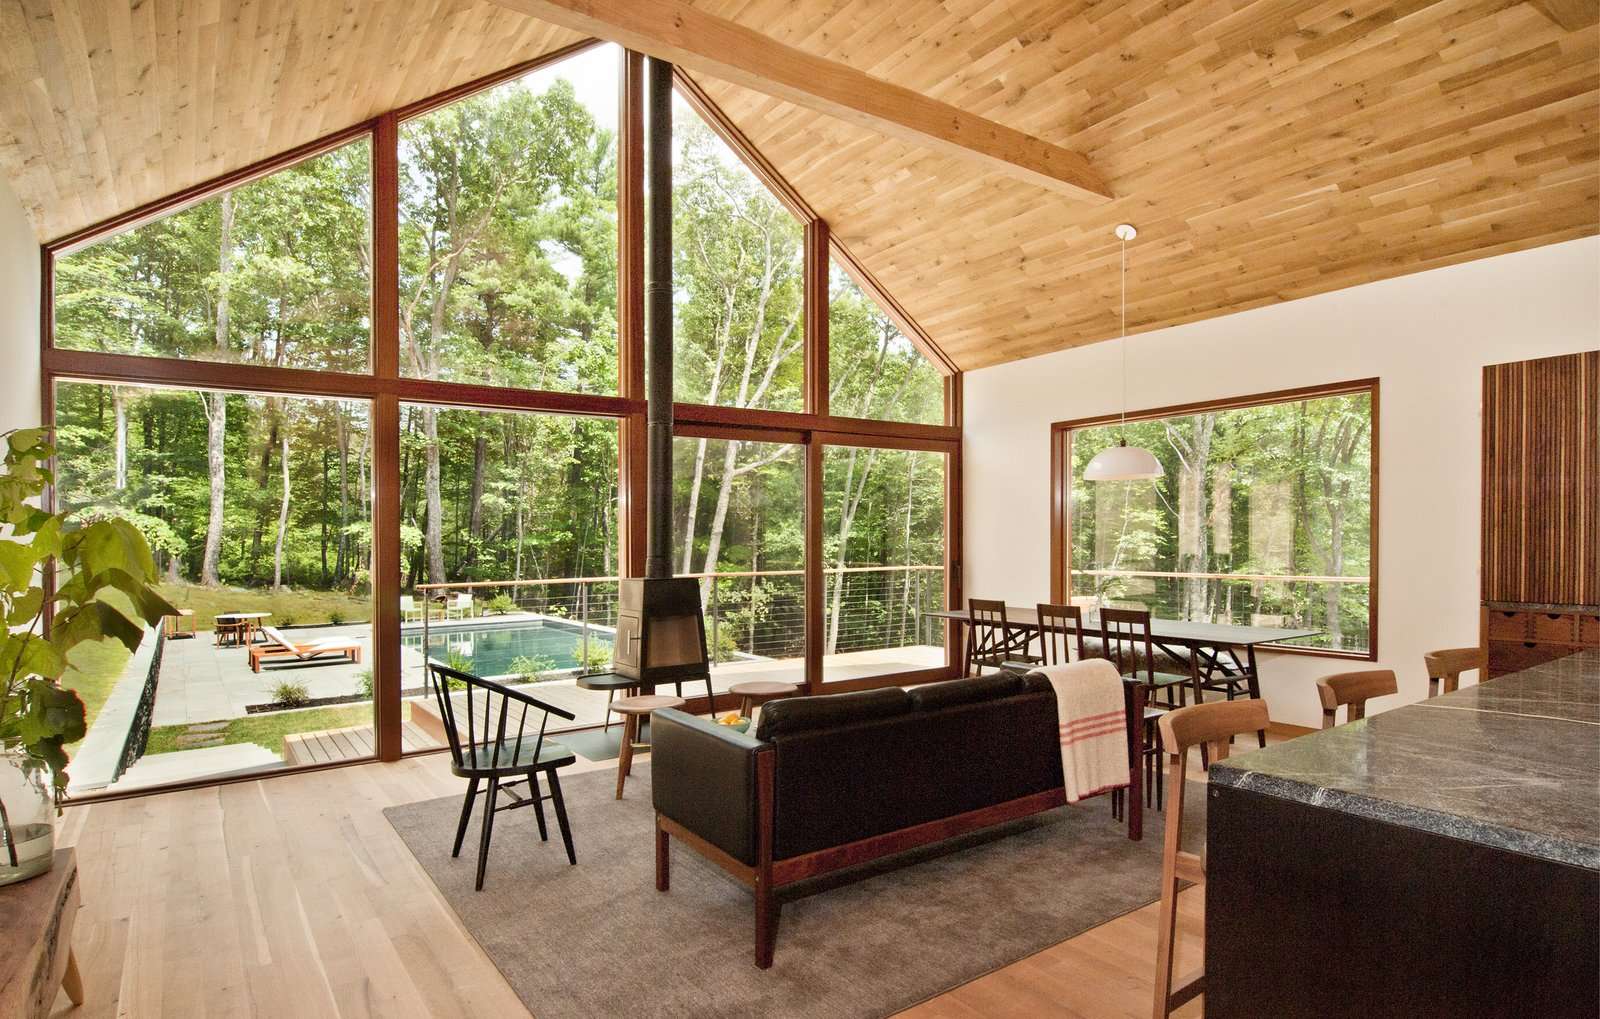 Floor-to-ceiling windows span the entire width of the living room, illuminating the space with natural light. A sliding door provides access to the wraparound porch and pool in the backyard.